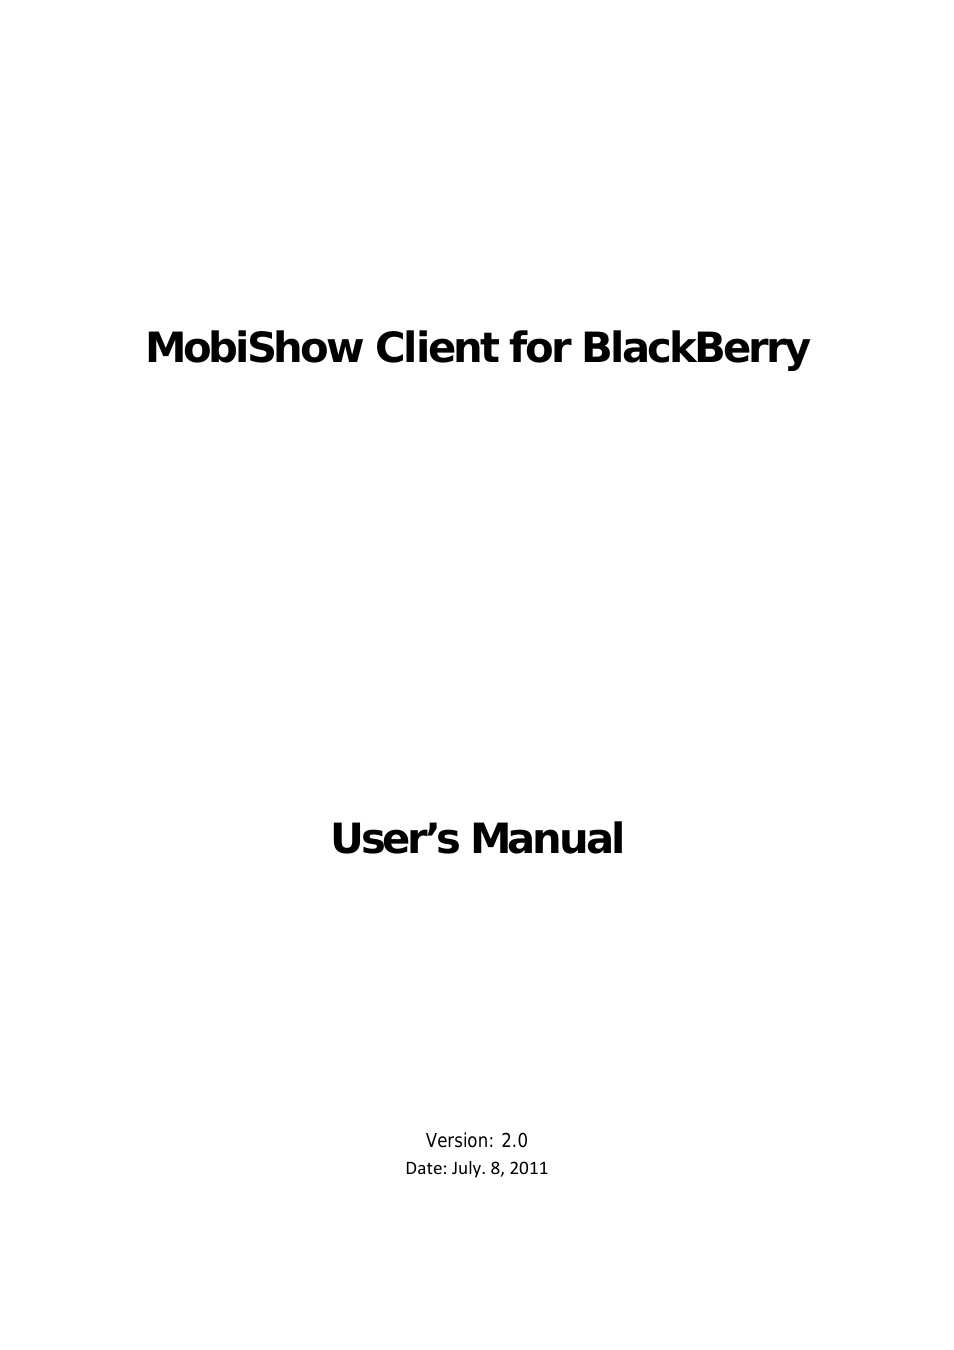 MobiShow User's Manual for Blackberry